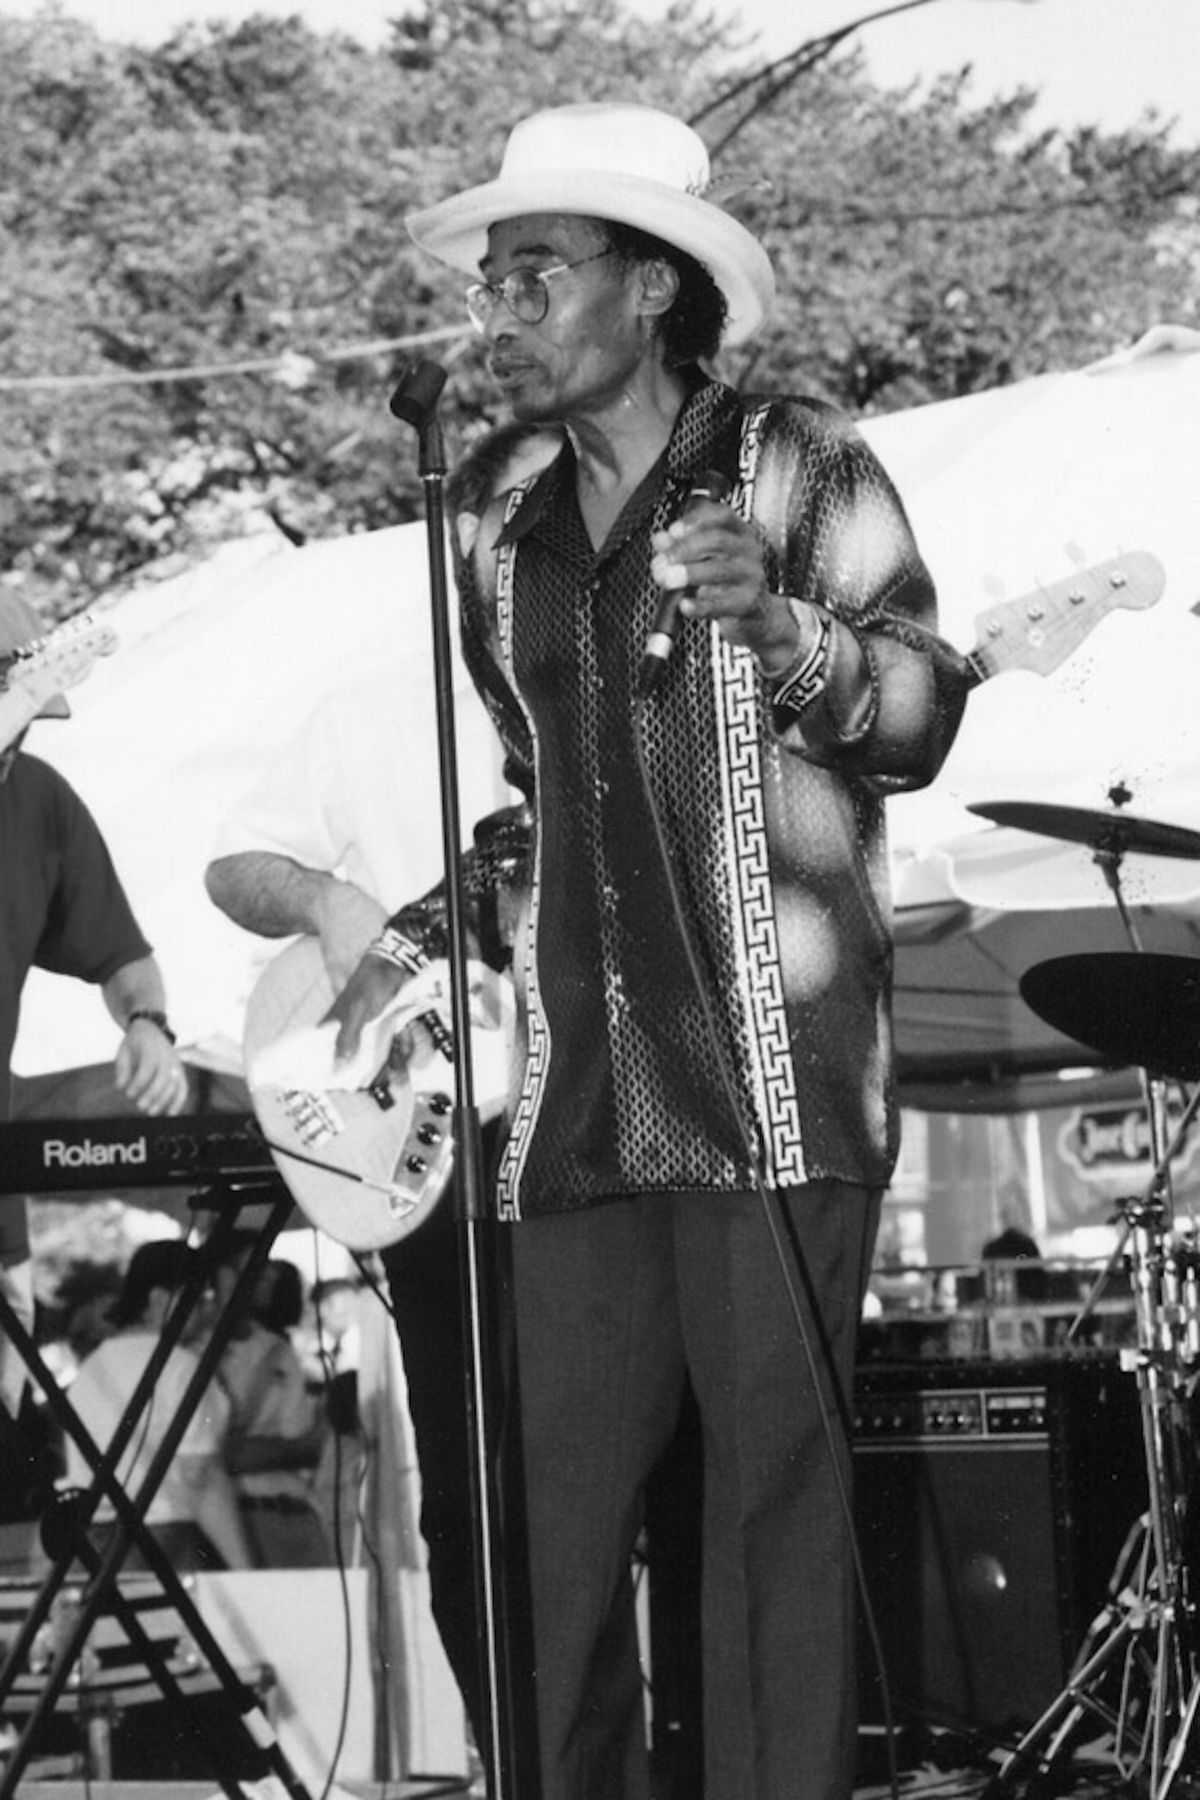 Little Al Thomas sings at the Chicago Blues Festival in 2000.